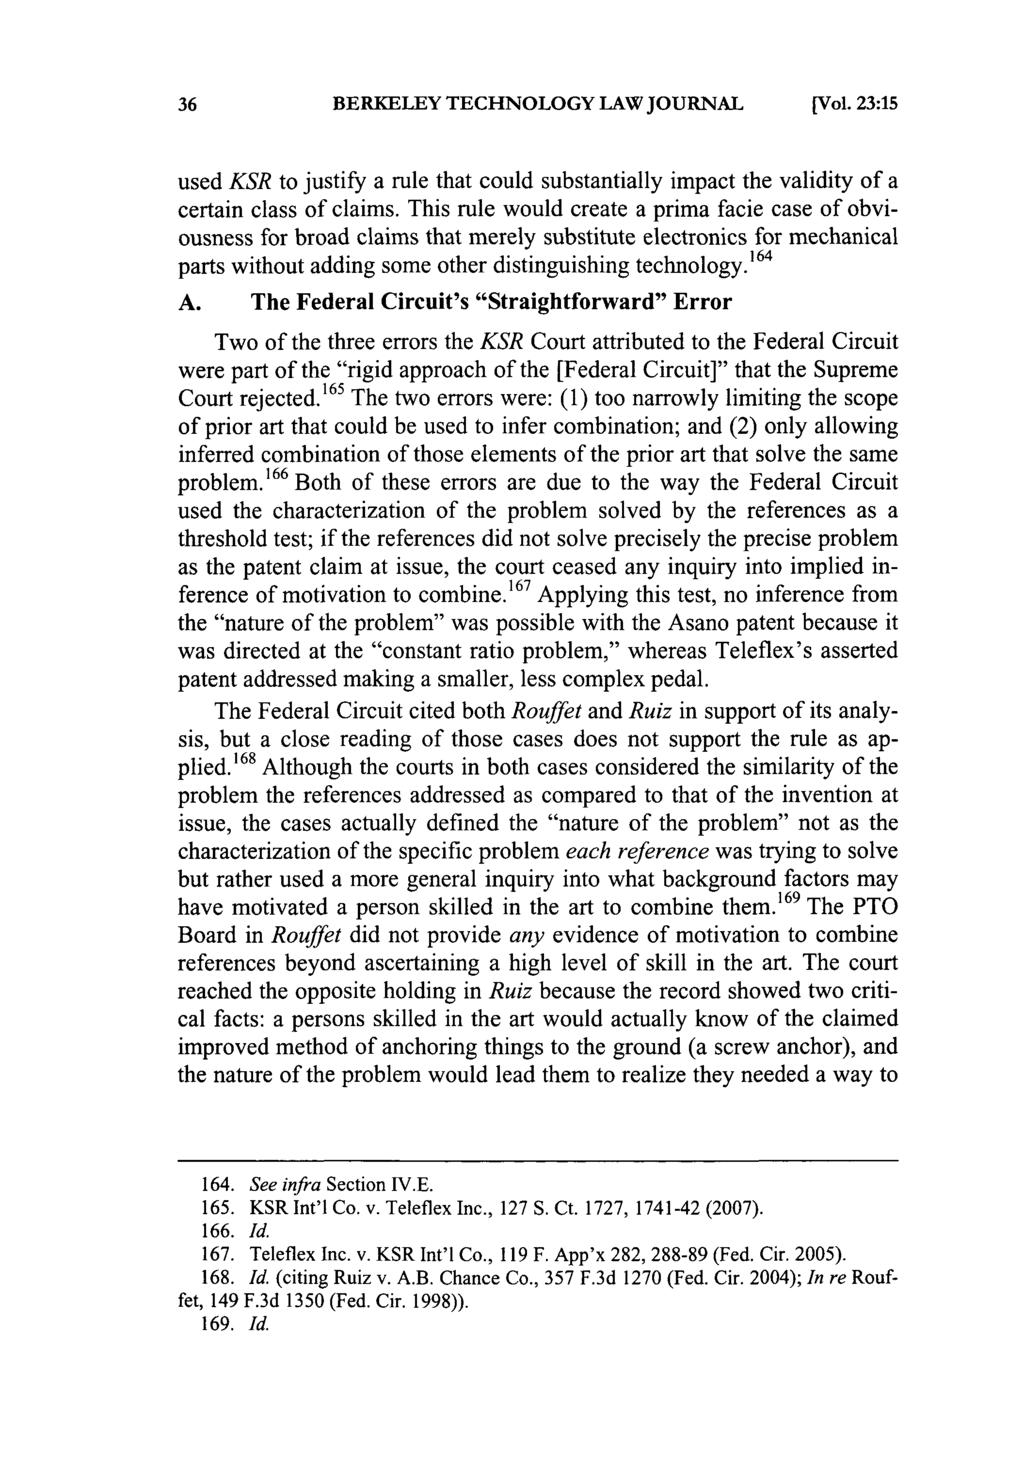 BERKELEY TECHNOLOGY LAW JOURNAL [Vol. 23:15 used KSR to justify a rule that could substantially impact the validity of a certain class of claims.